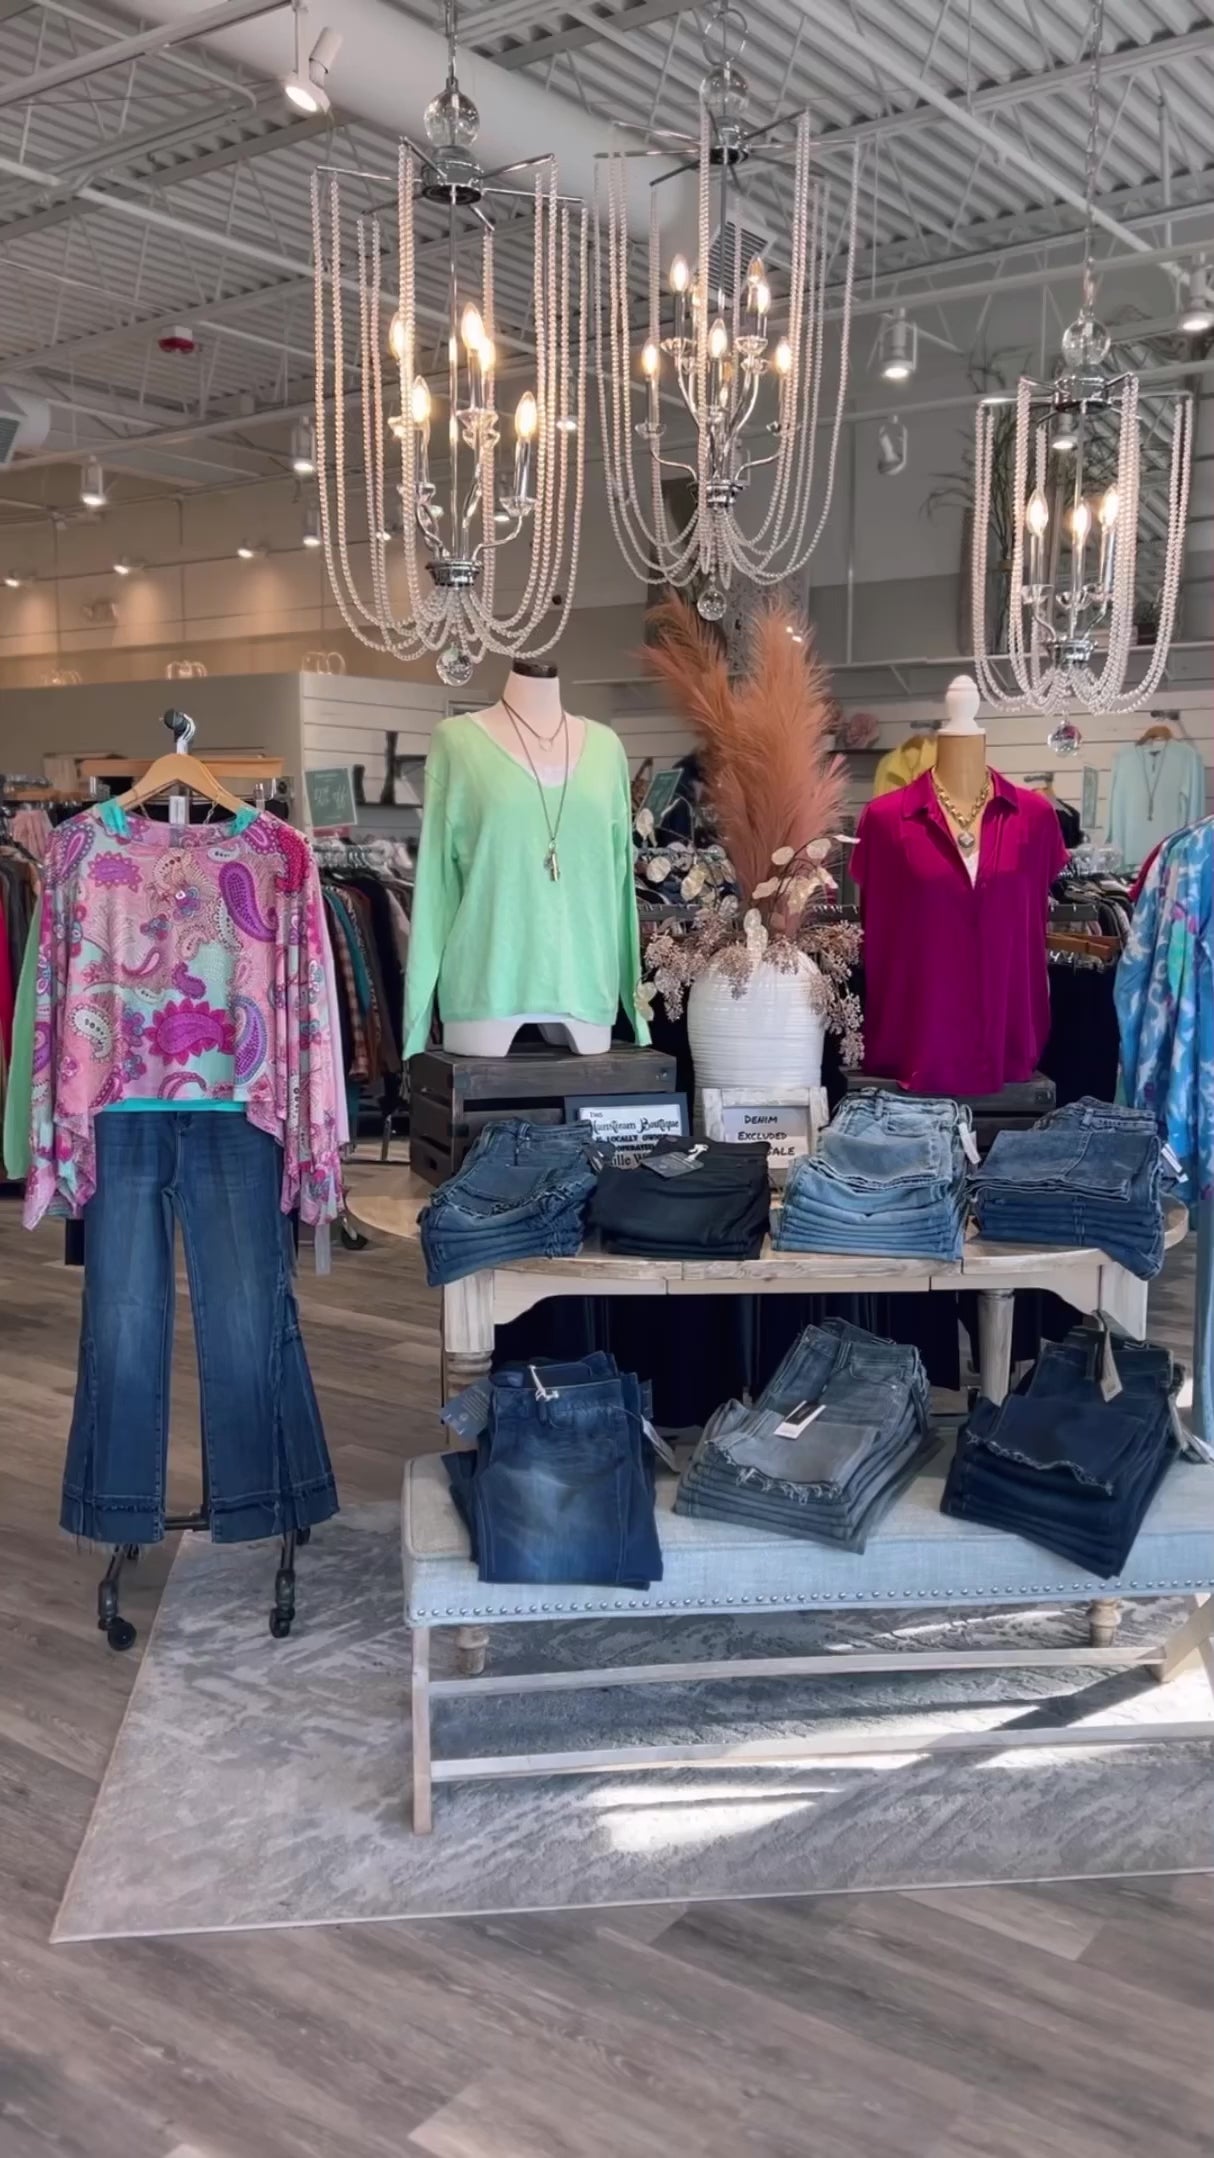 Mainstream boutique video of store featuring new spring women's clothing, jewelry, shoes, denim and other bottoms